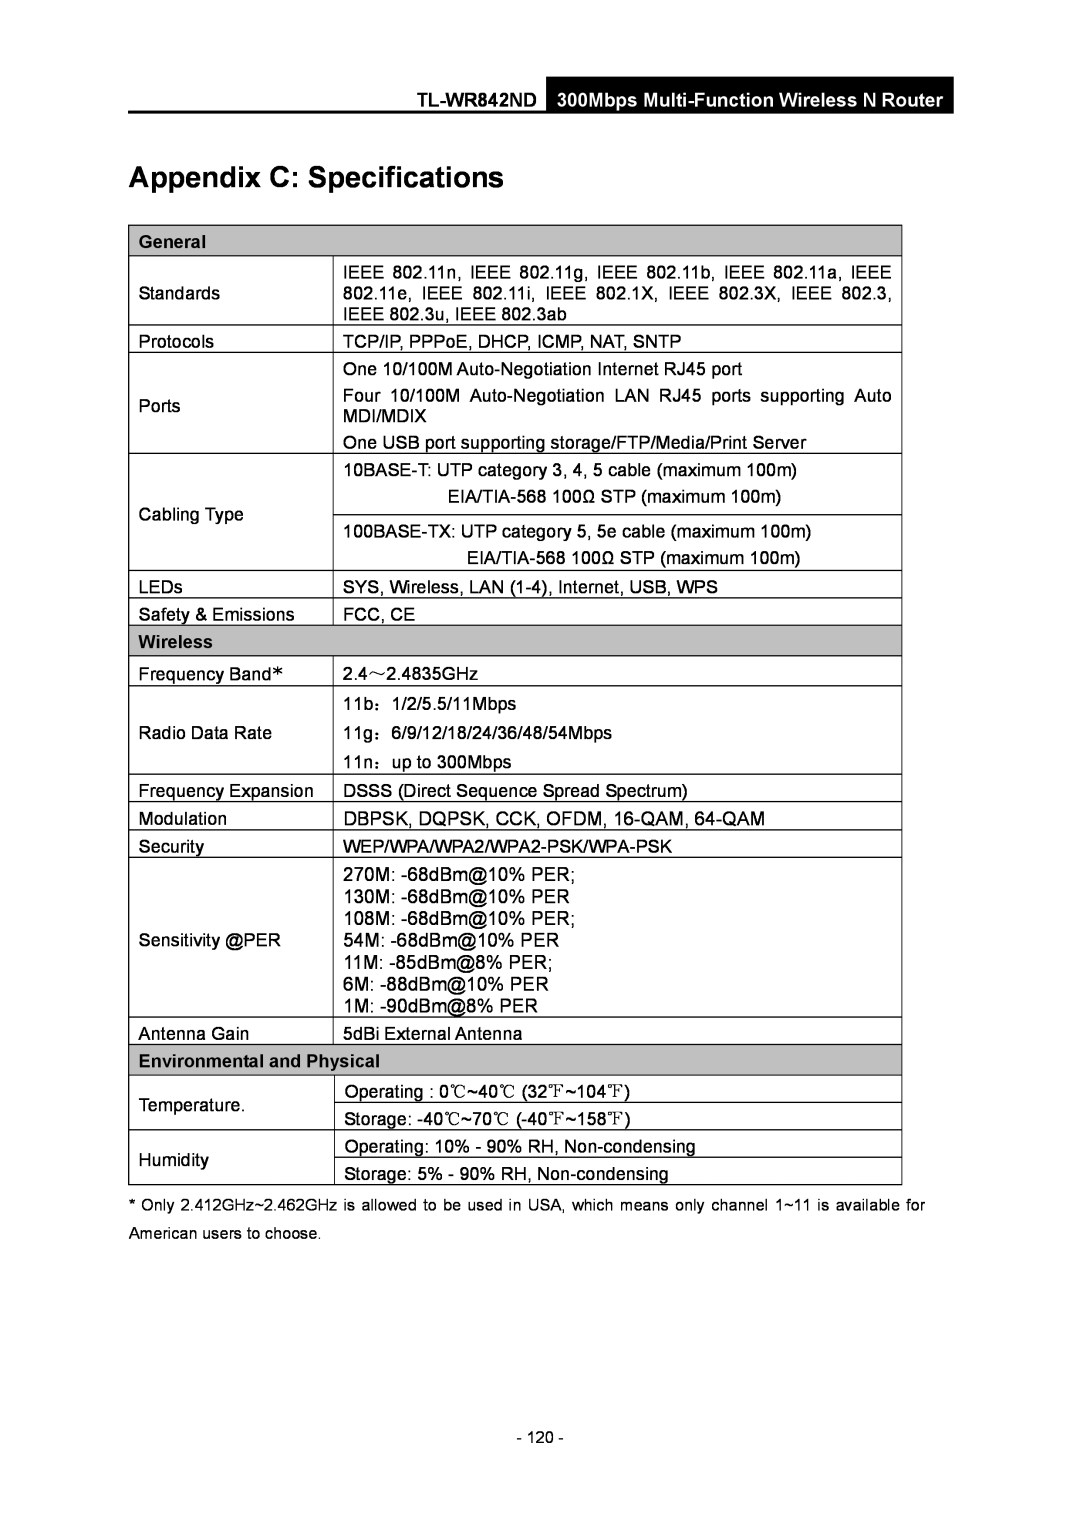 TP-Link WR-842ND manual Appendix C Specifications, TL-WR842ND, 300Mbps Multi-Function Wireless N Router, General 